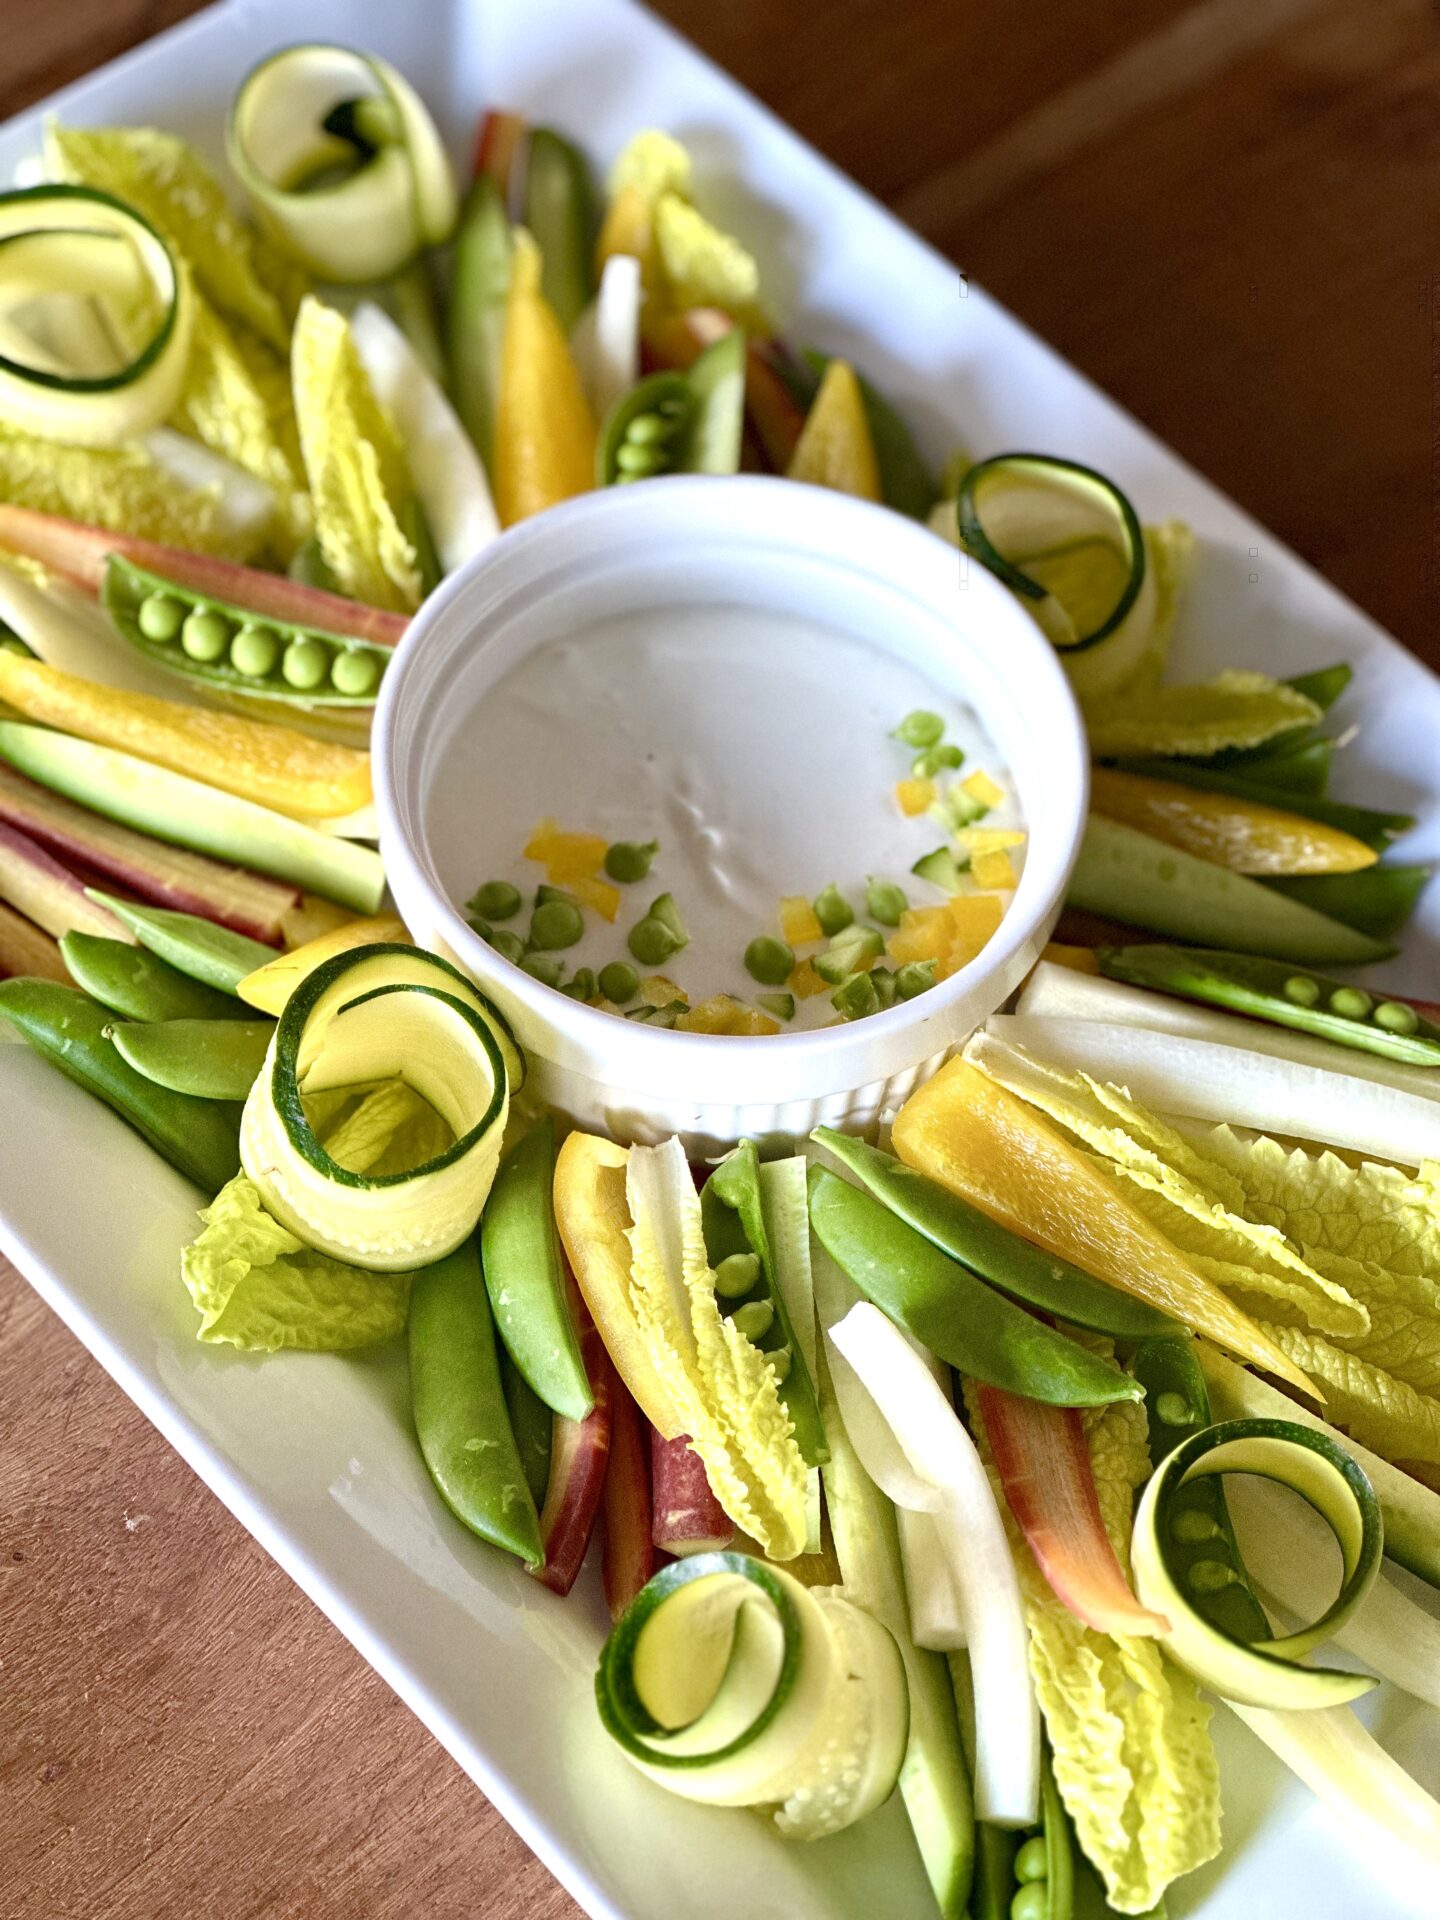 Platter of fresh spring peas, carrots, lettuce, peppers and zucchini with a light and creamy lemon dip